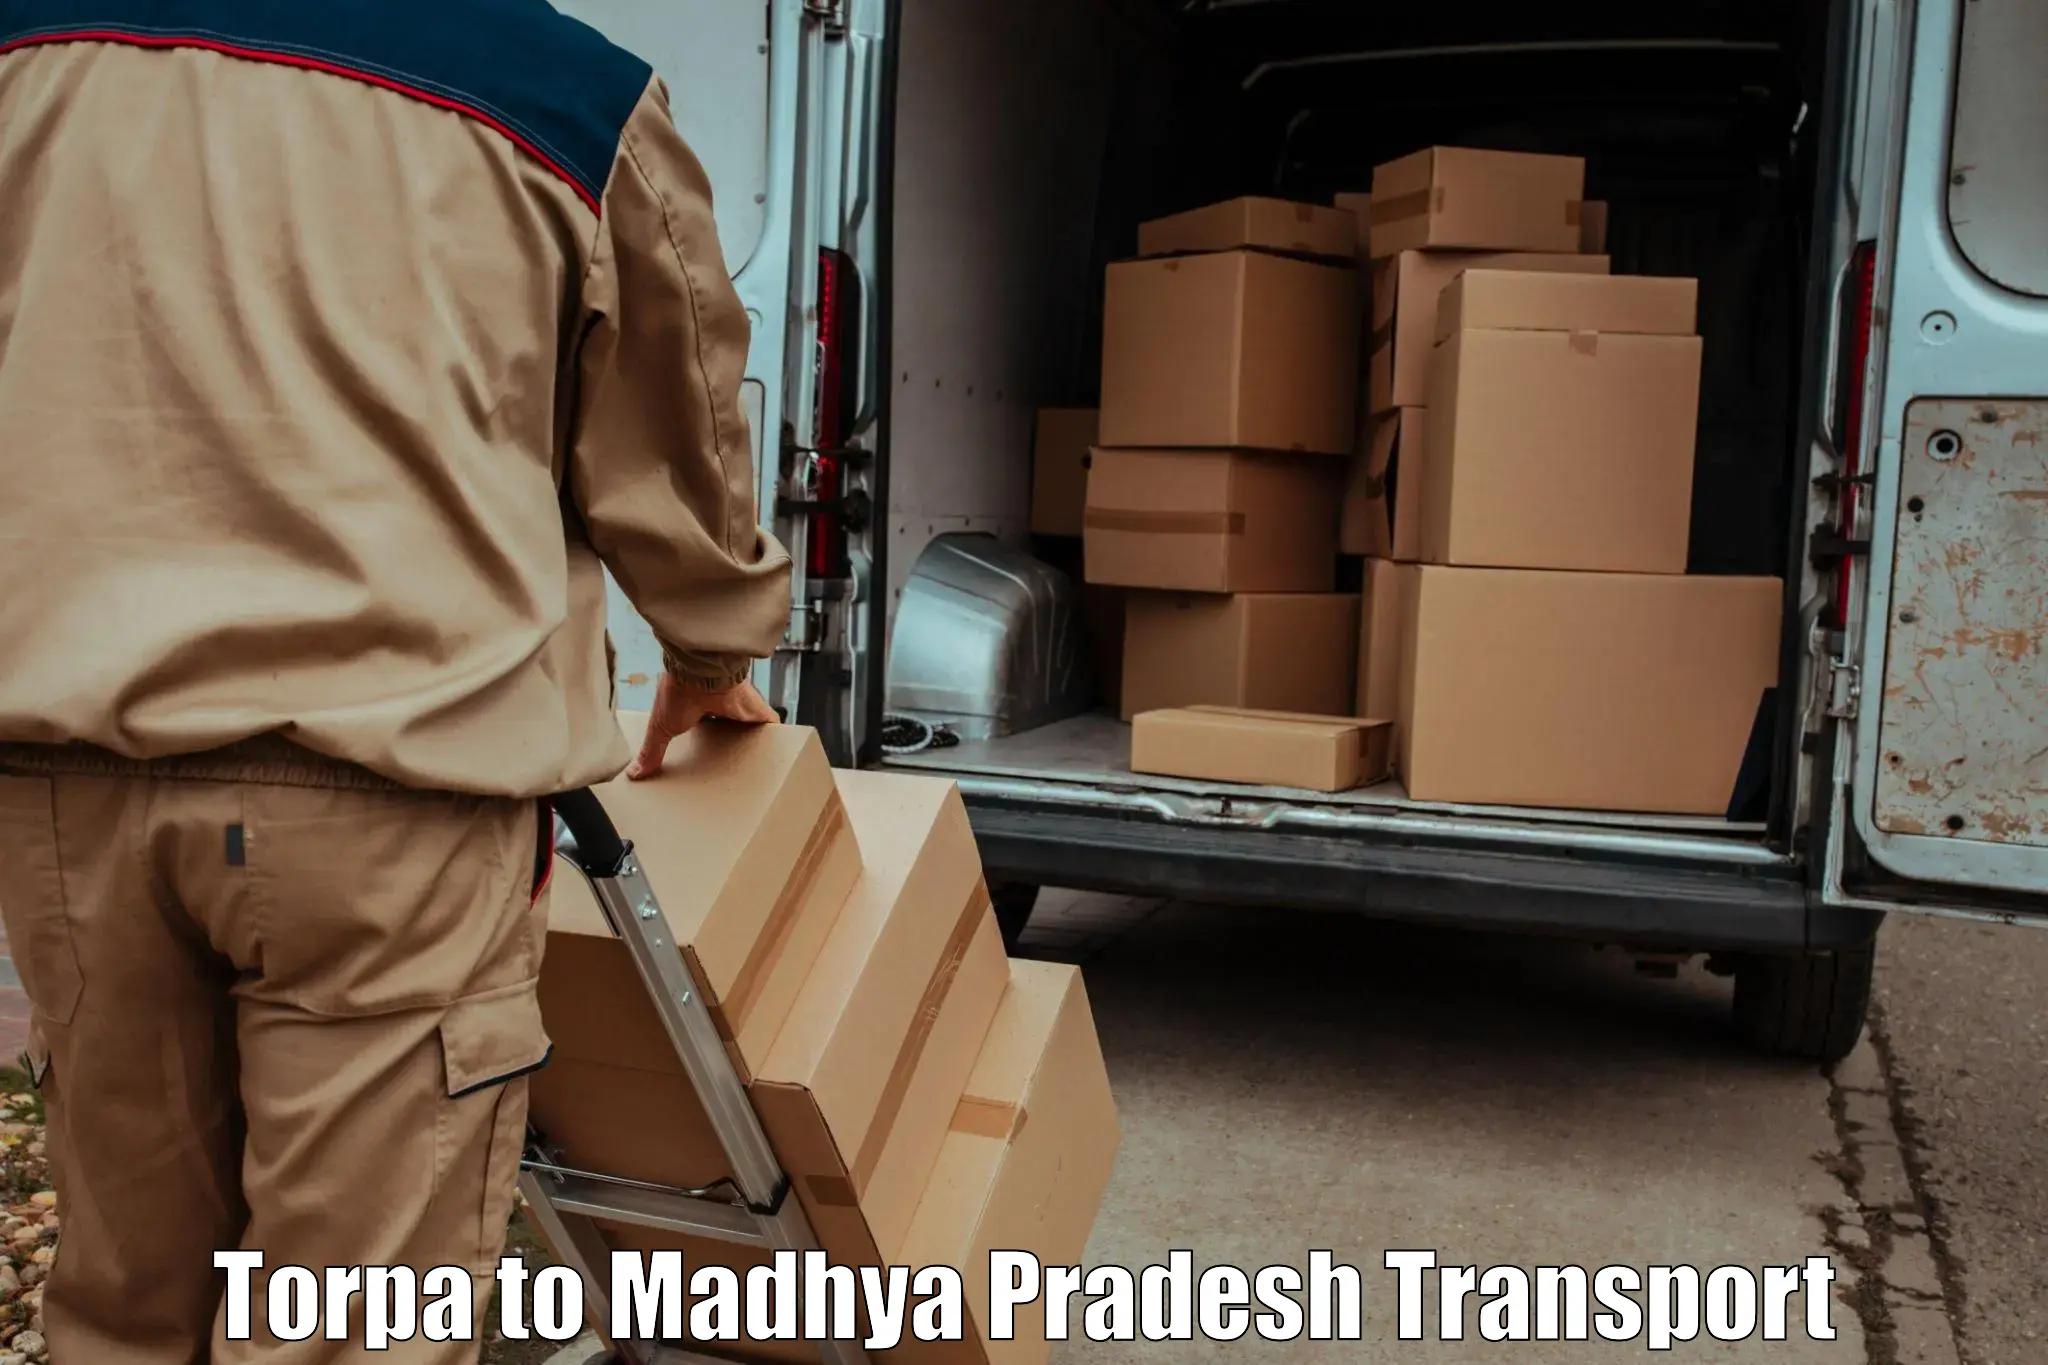 Truck transport companies in India Torpa to Satna